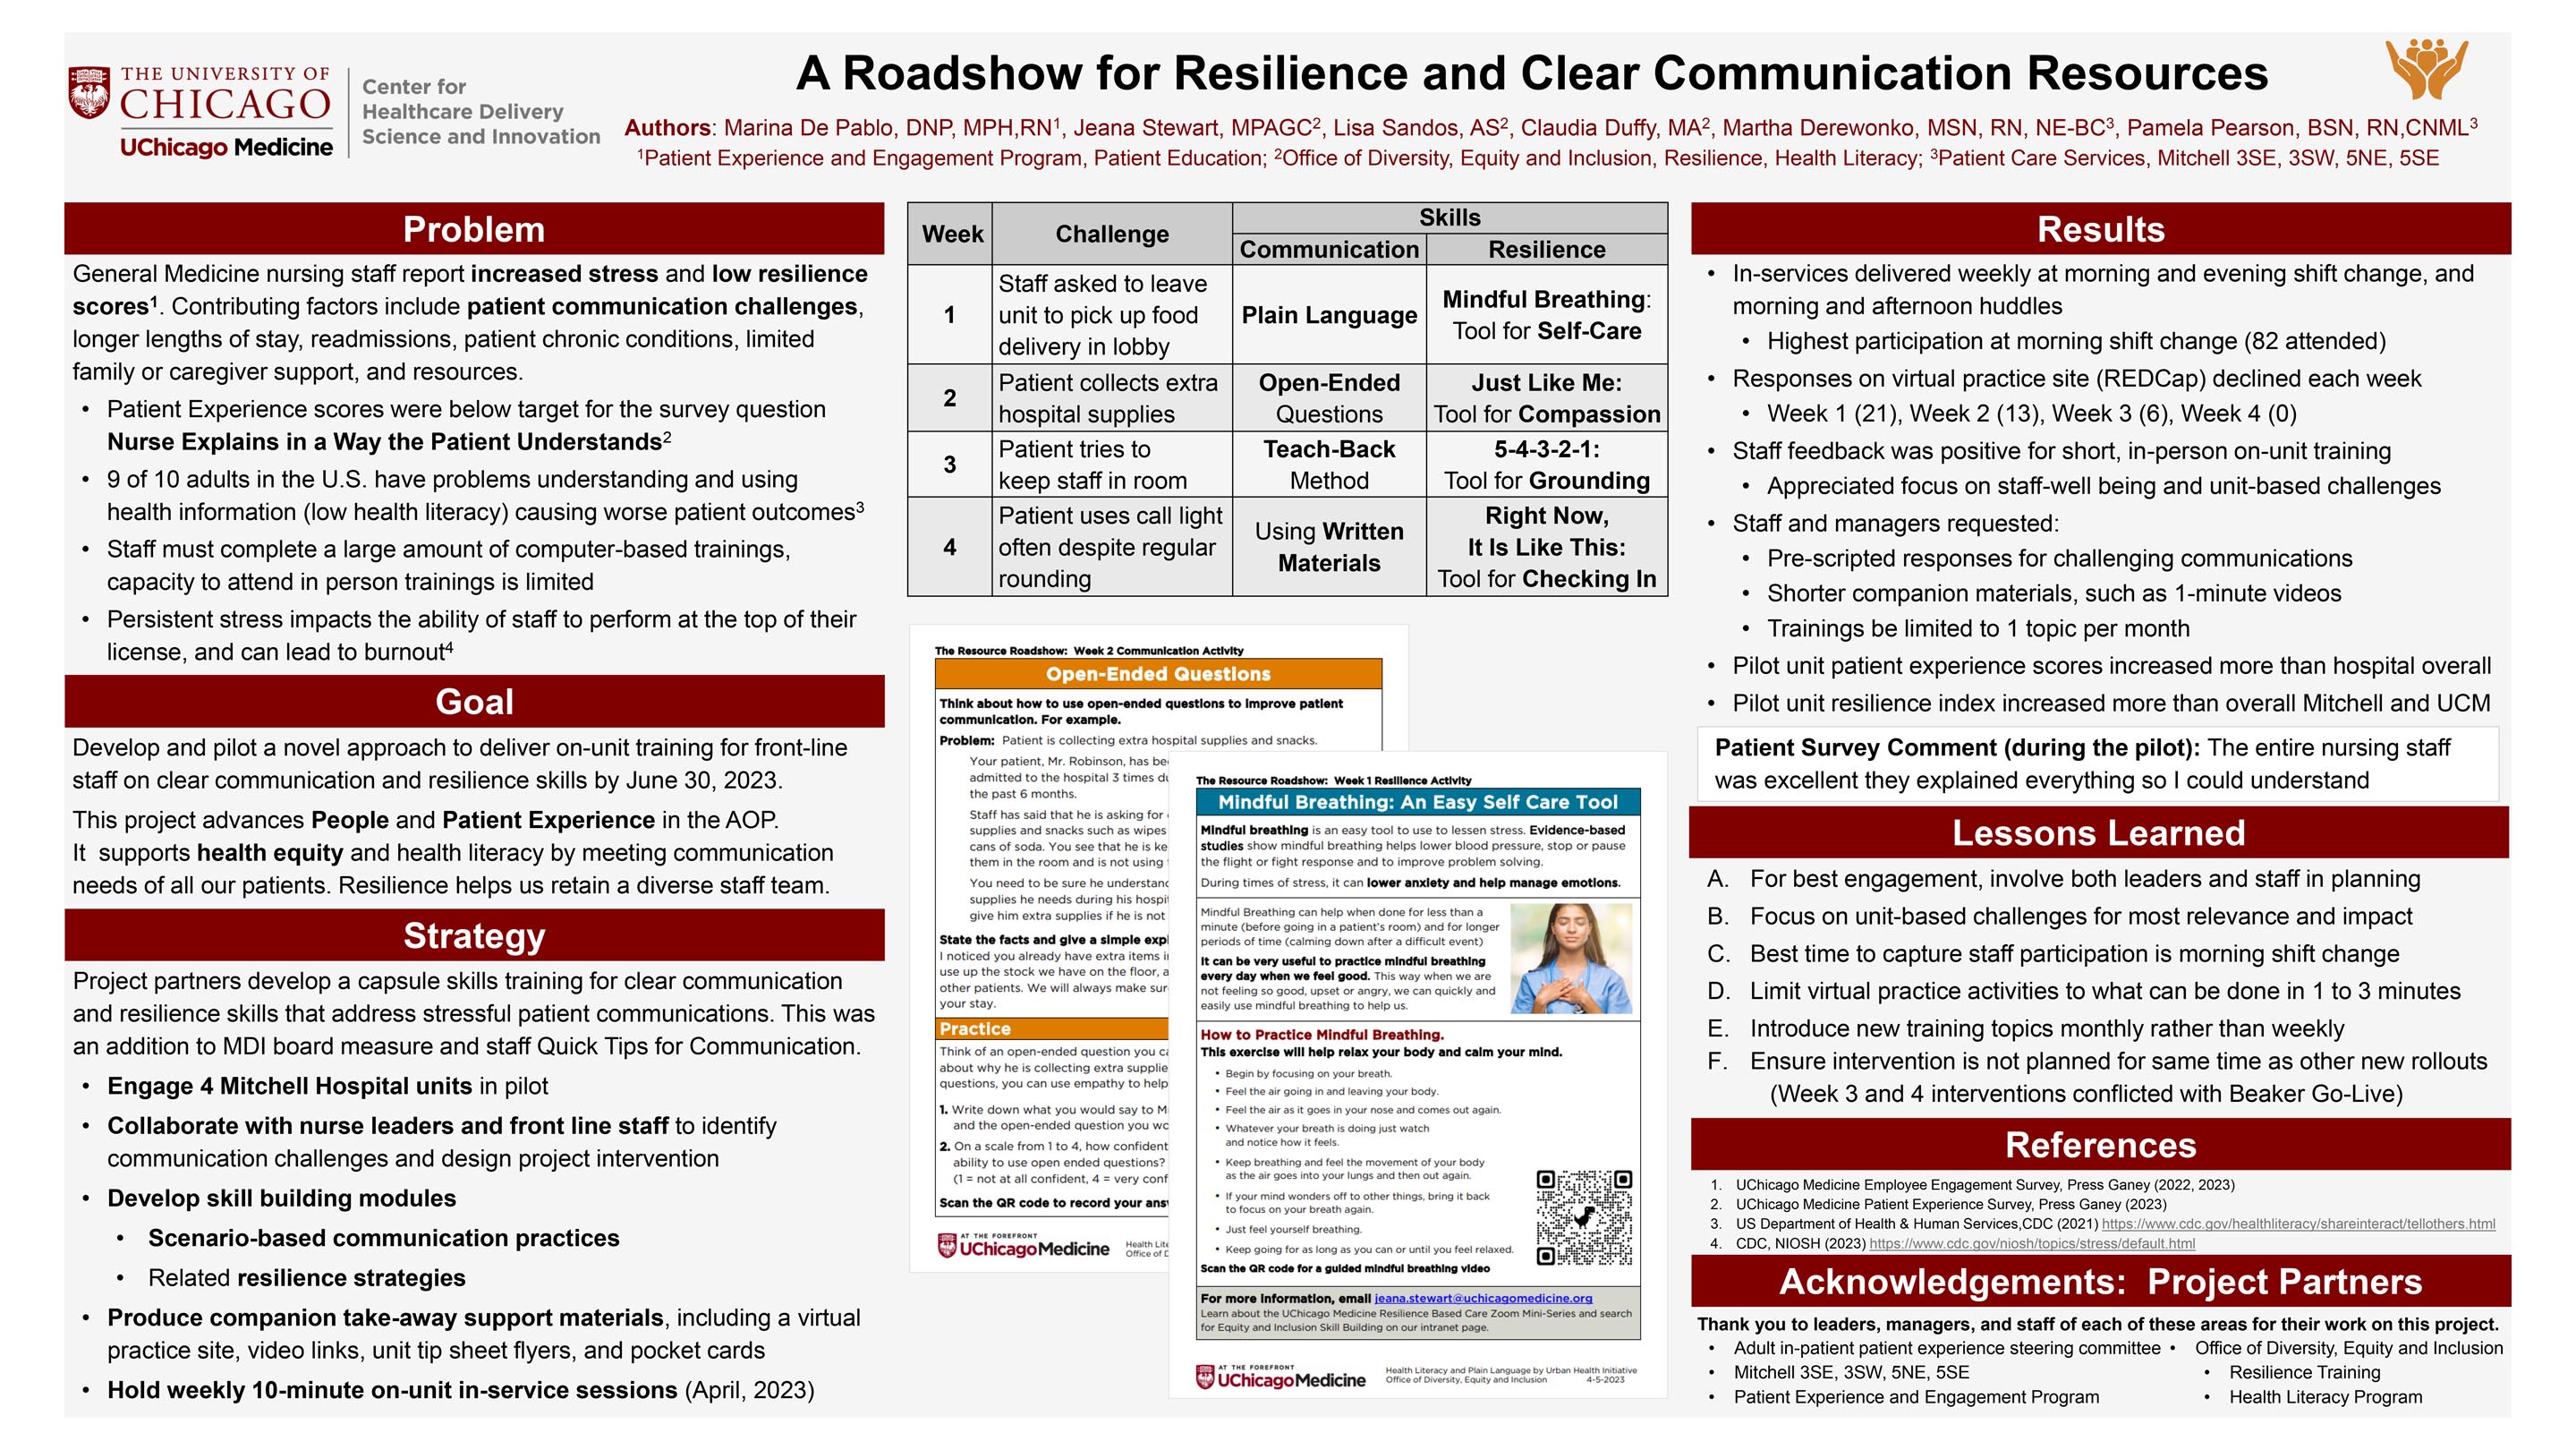 DEPABLO_Roadshow-for-Resilience-and-Clear-Communication